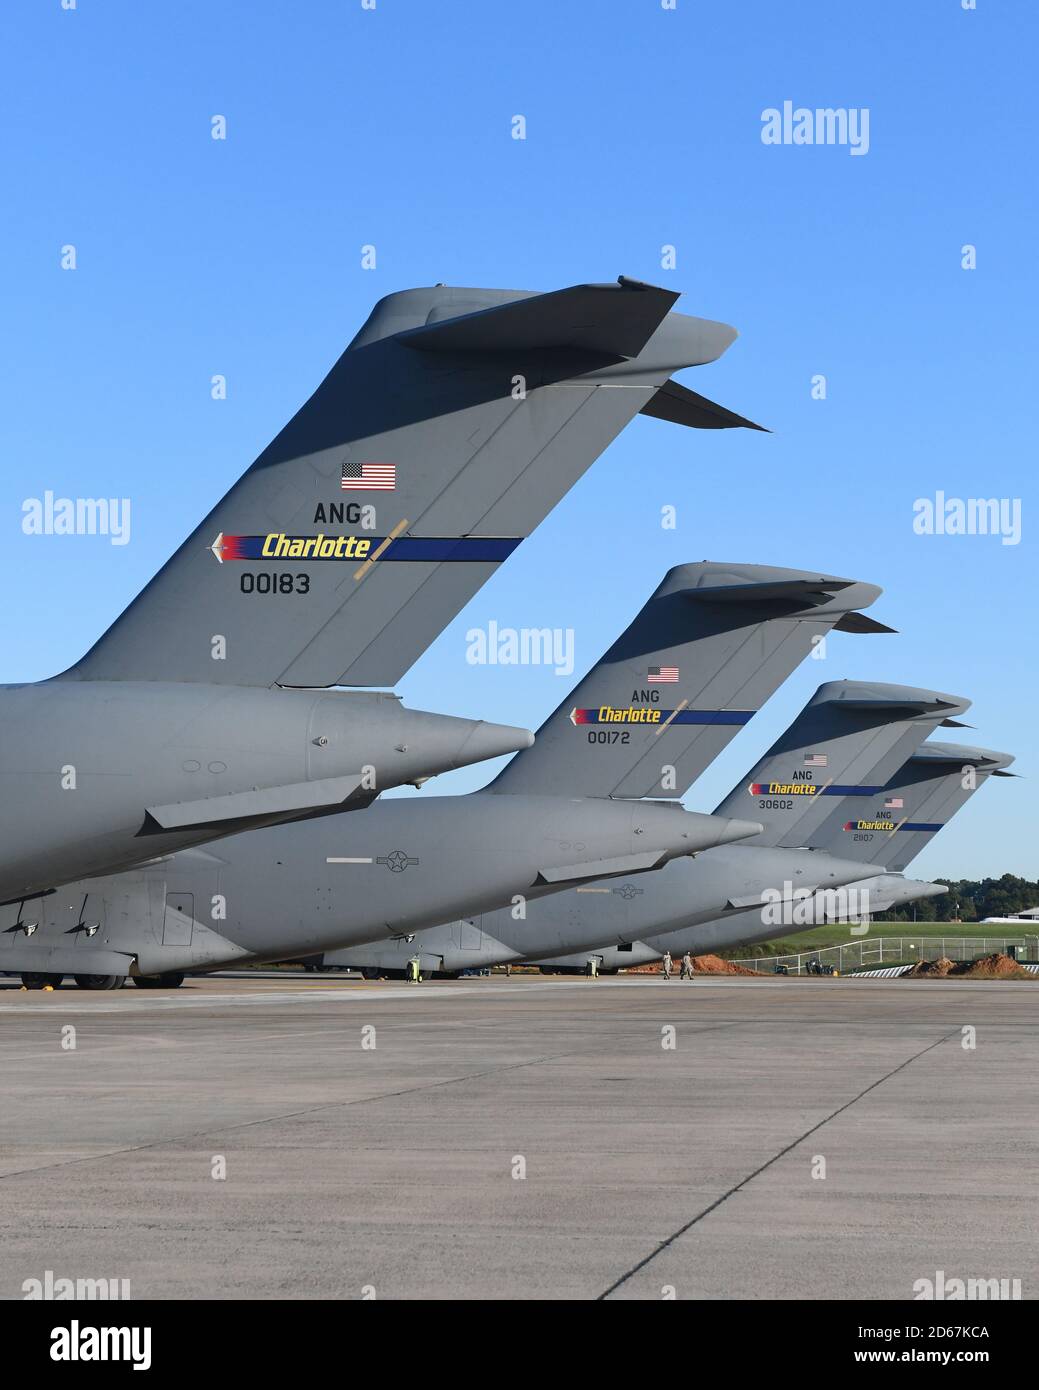 Five C-17 Globemaster III Aircraft belonging to the 145th Airlift Wing are  parked in a row on a sunny day at the North Carolina Air National Guard Base,  Charlotte Douglas International Airport,